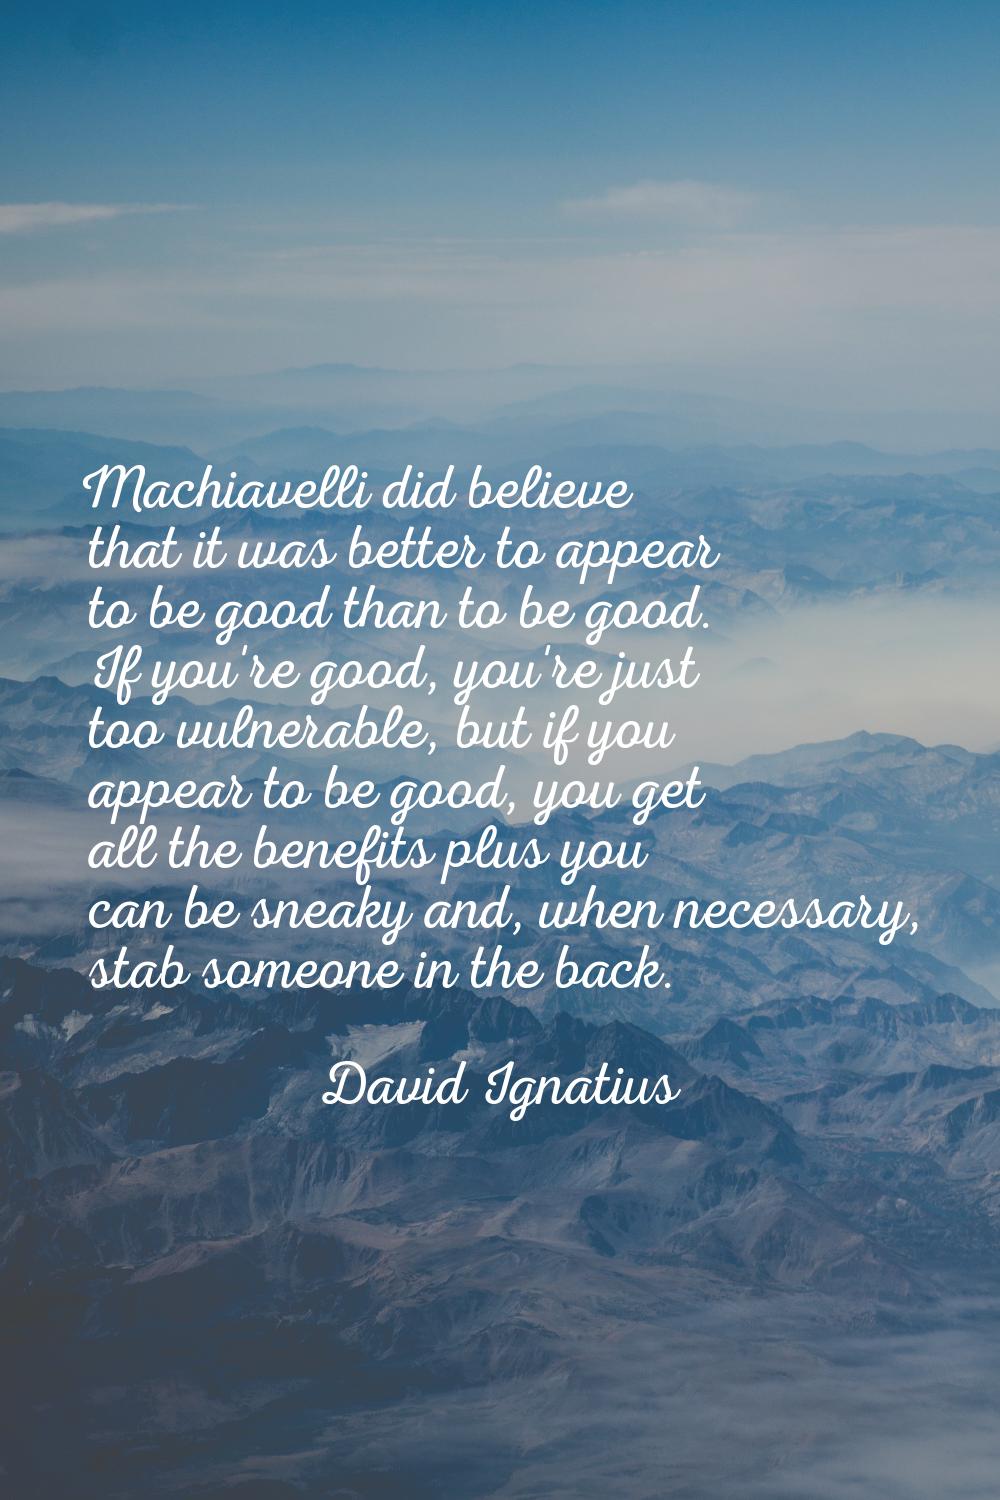 Machiavelli did believe that it was better to appear to be good than to be good. If you're good, yo